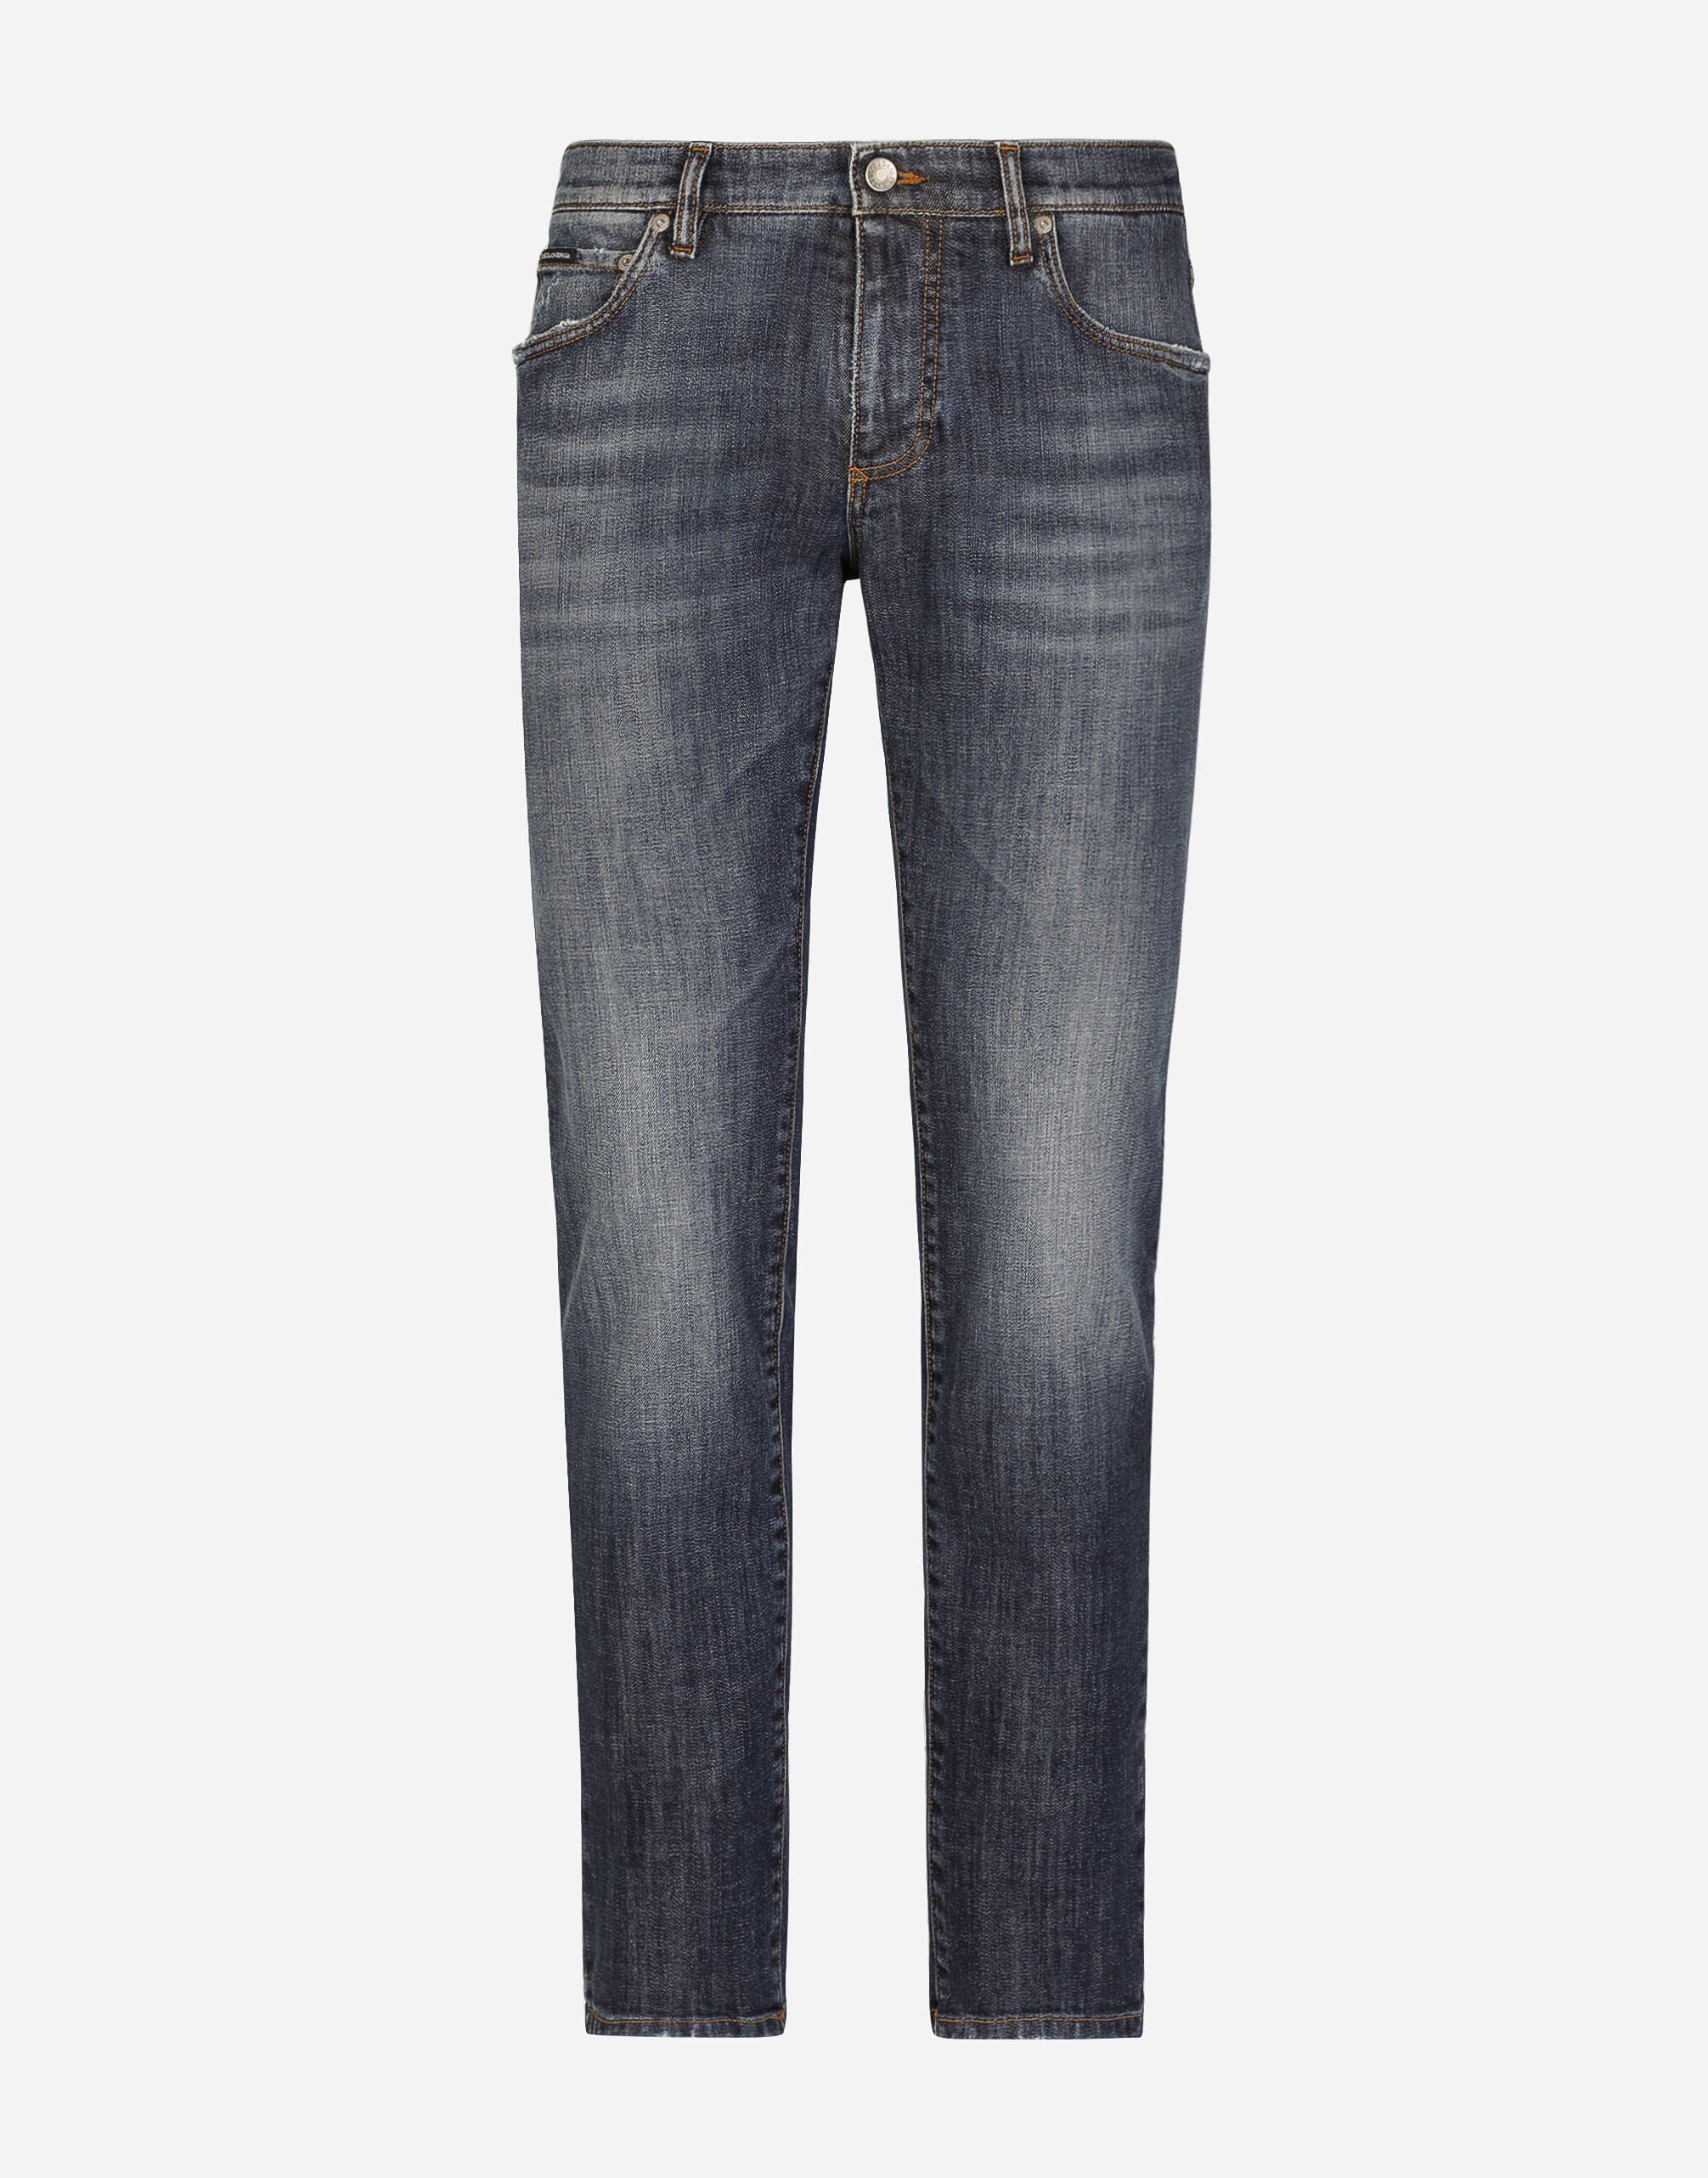 ${brand} Slim fit washed stretch jeans with subtle abrasions ${colorDescription} ${masterID}